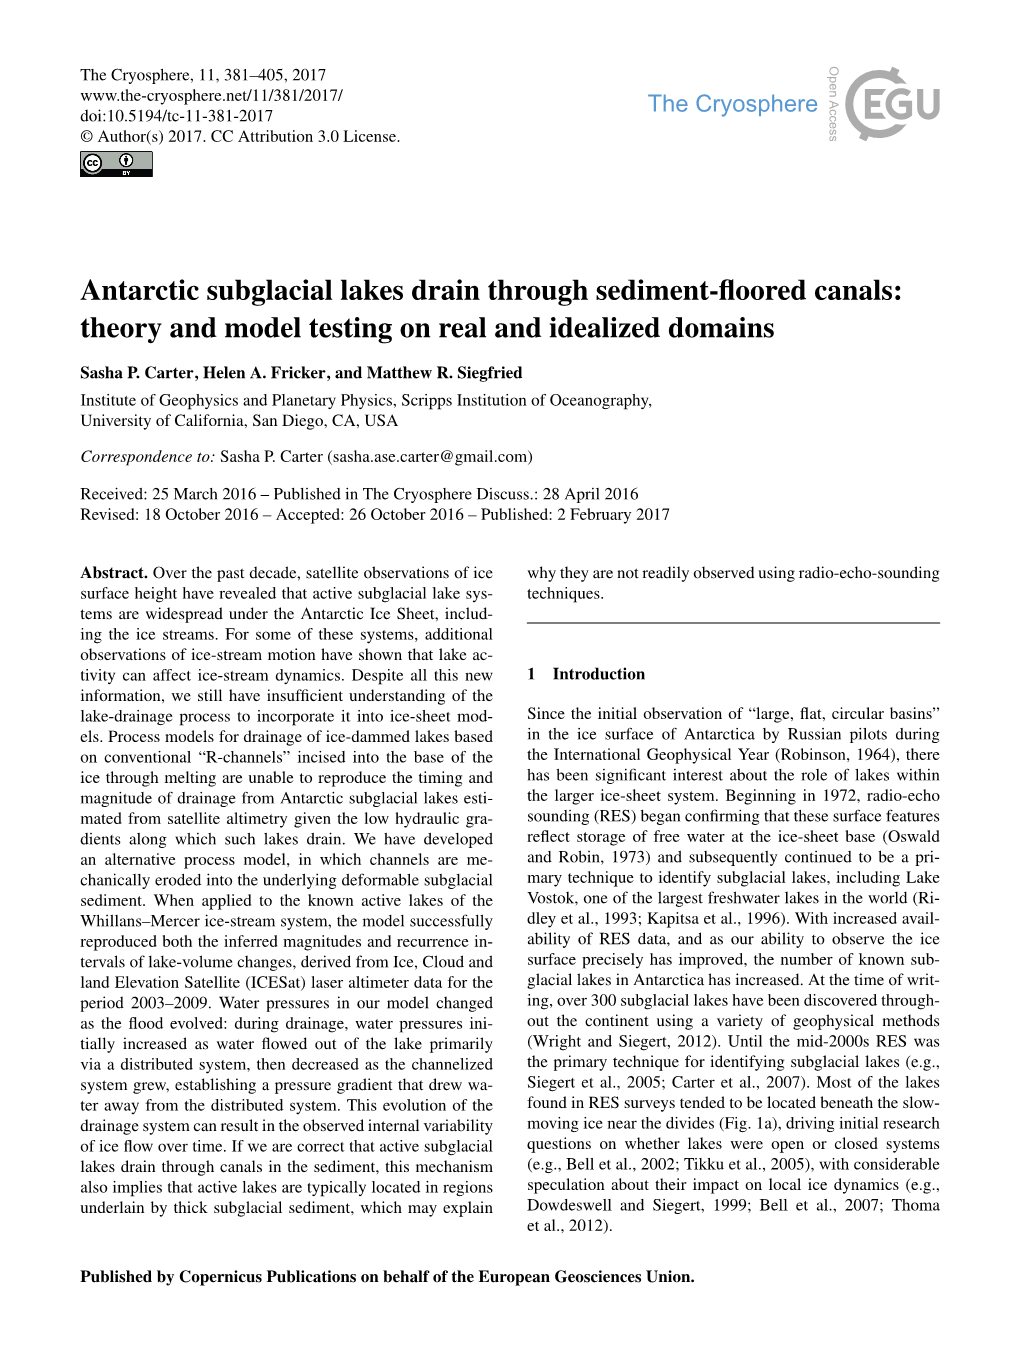 Antarctic Subglacial Lakes Drain Through Sediment-ﬂoored Canals: Theory and Model Testing on Real and Idealized Domains